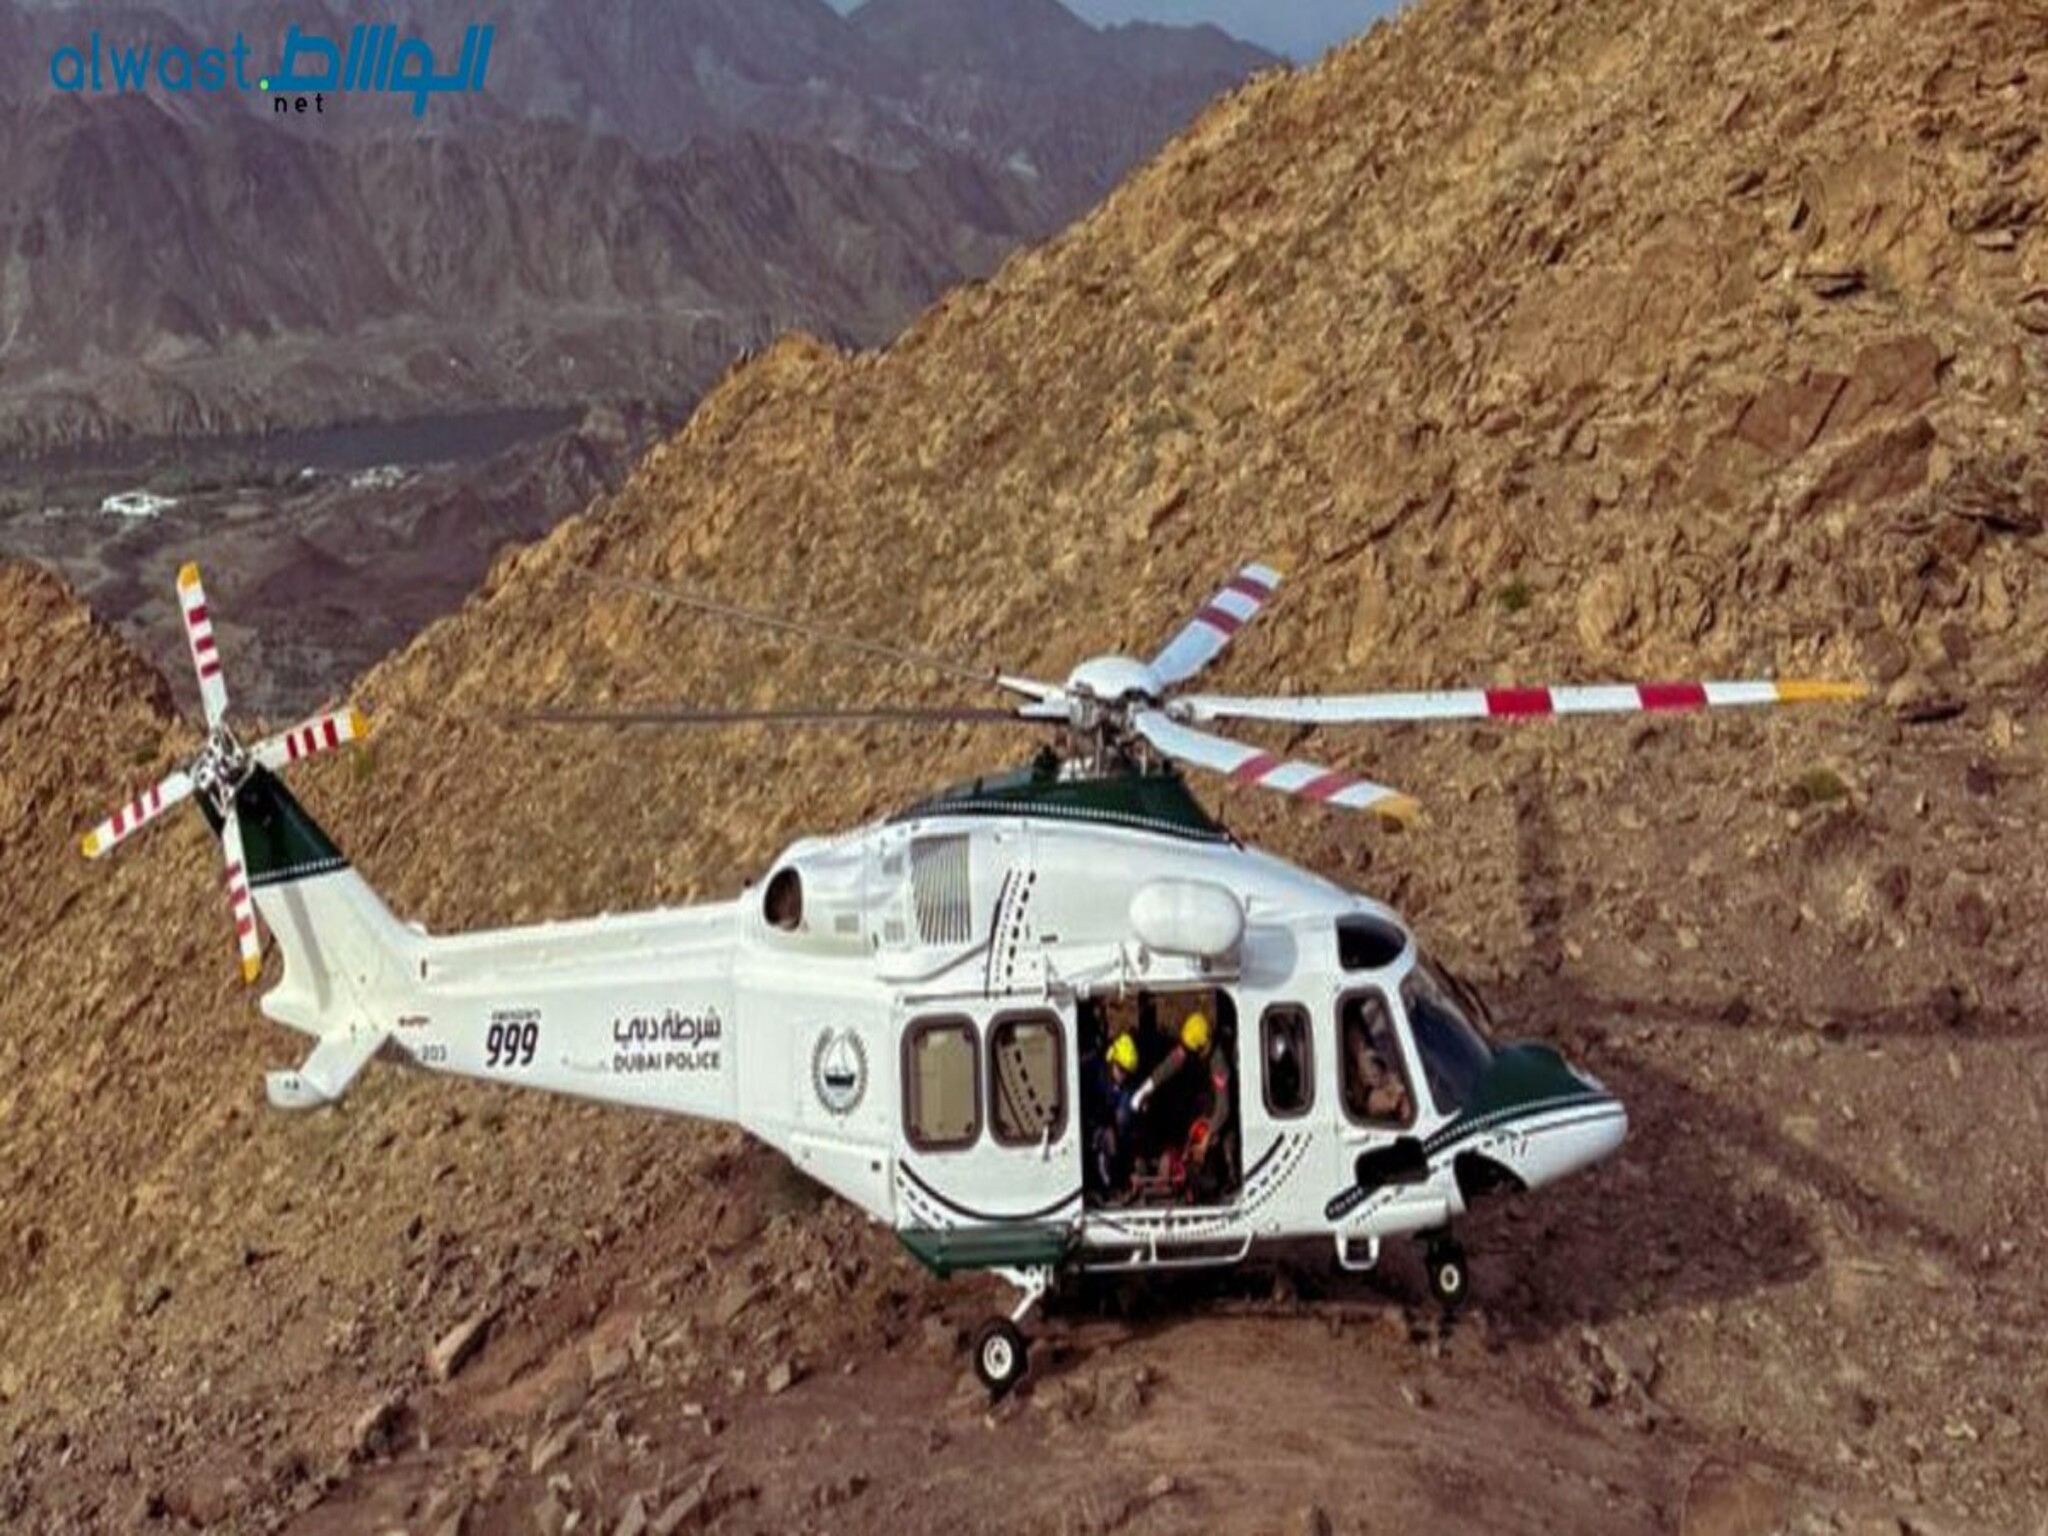 UAE police Rescue a tourist who fell ill in the Hatta mountains